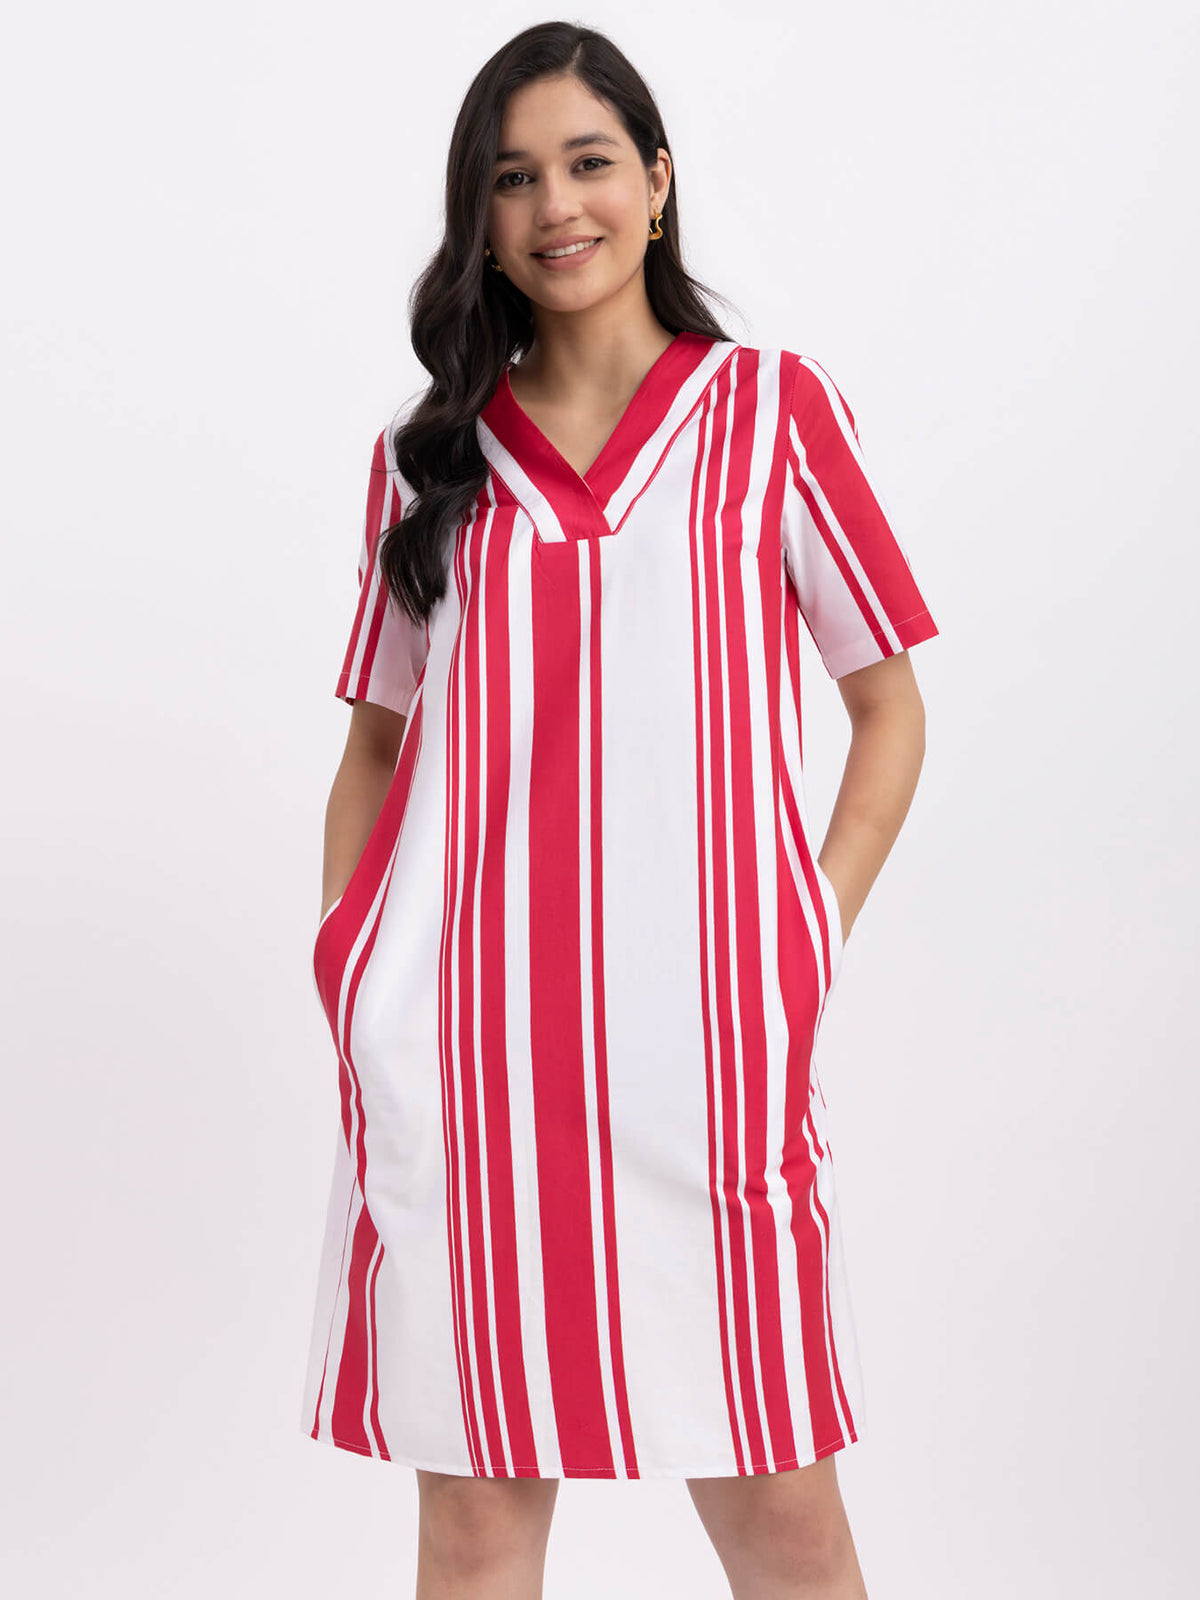 Cotton Striped Dress - Red And White